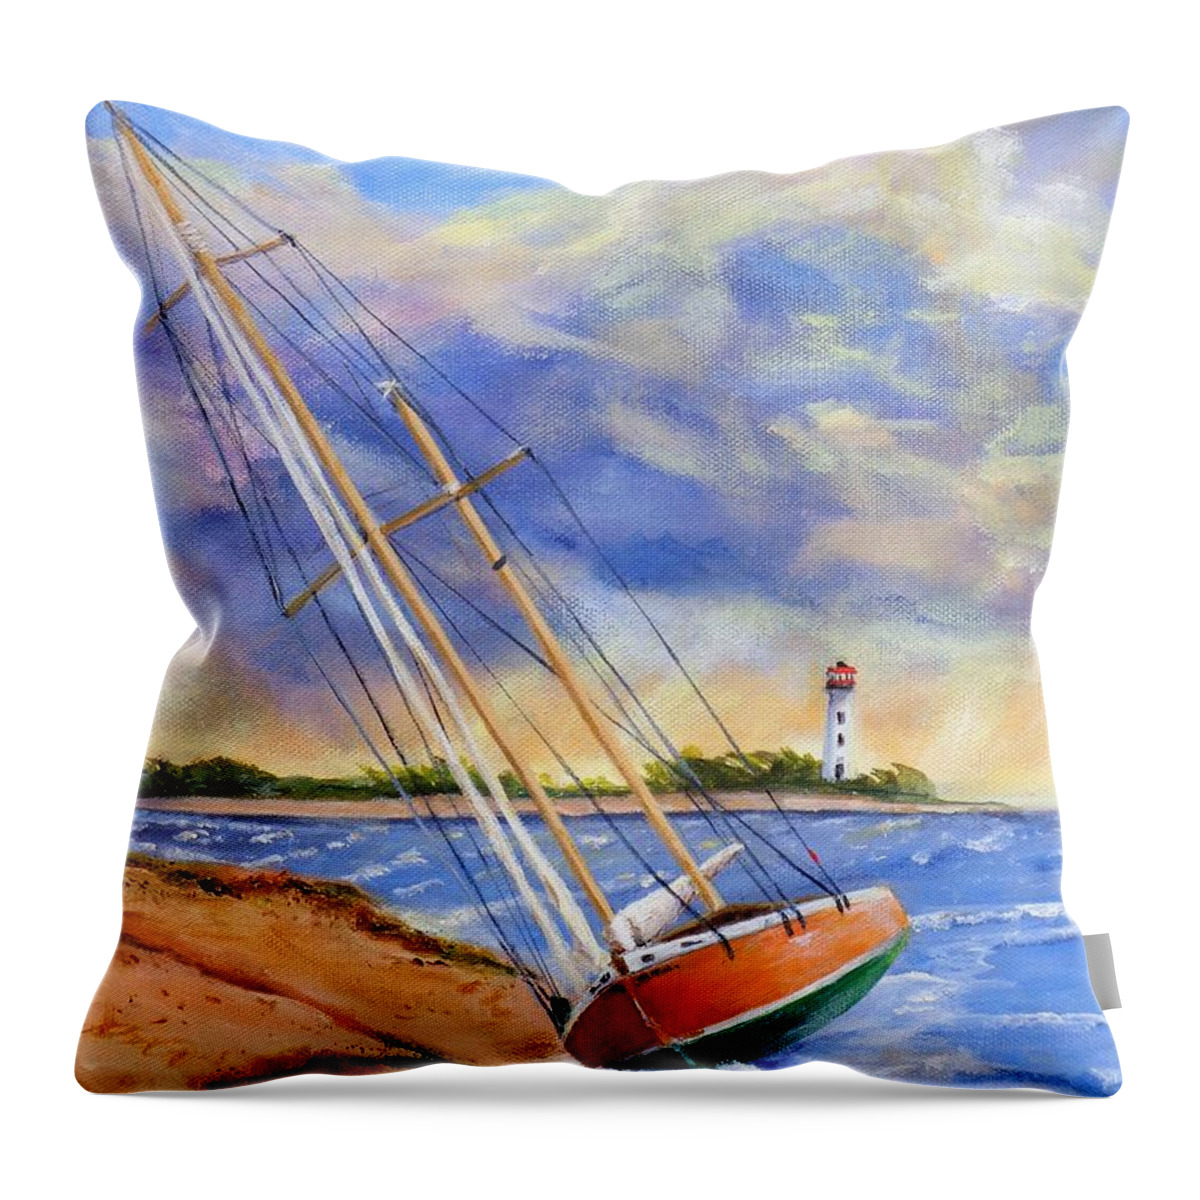 Storm Throw Pillow featuring the painting Storm Boat Beaching by Deborah Naves